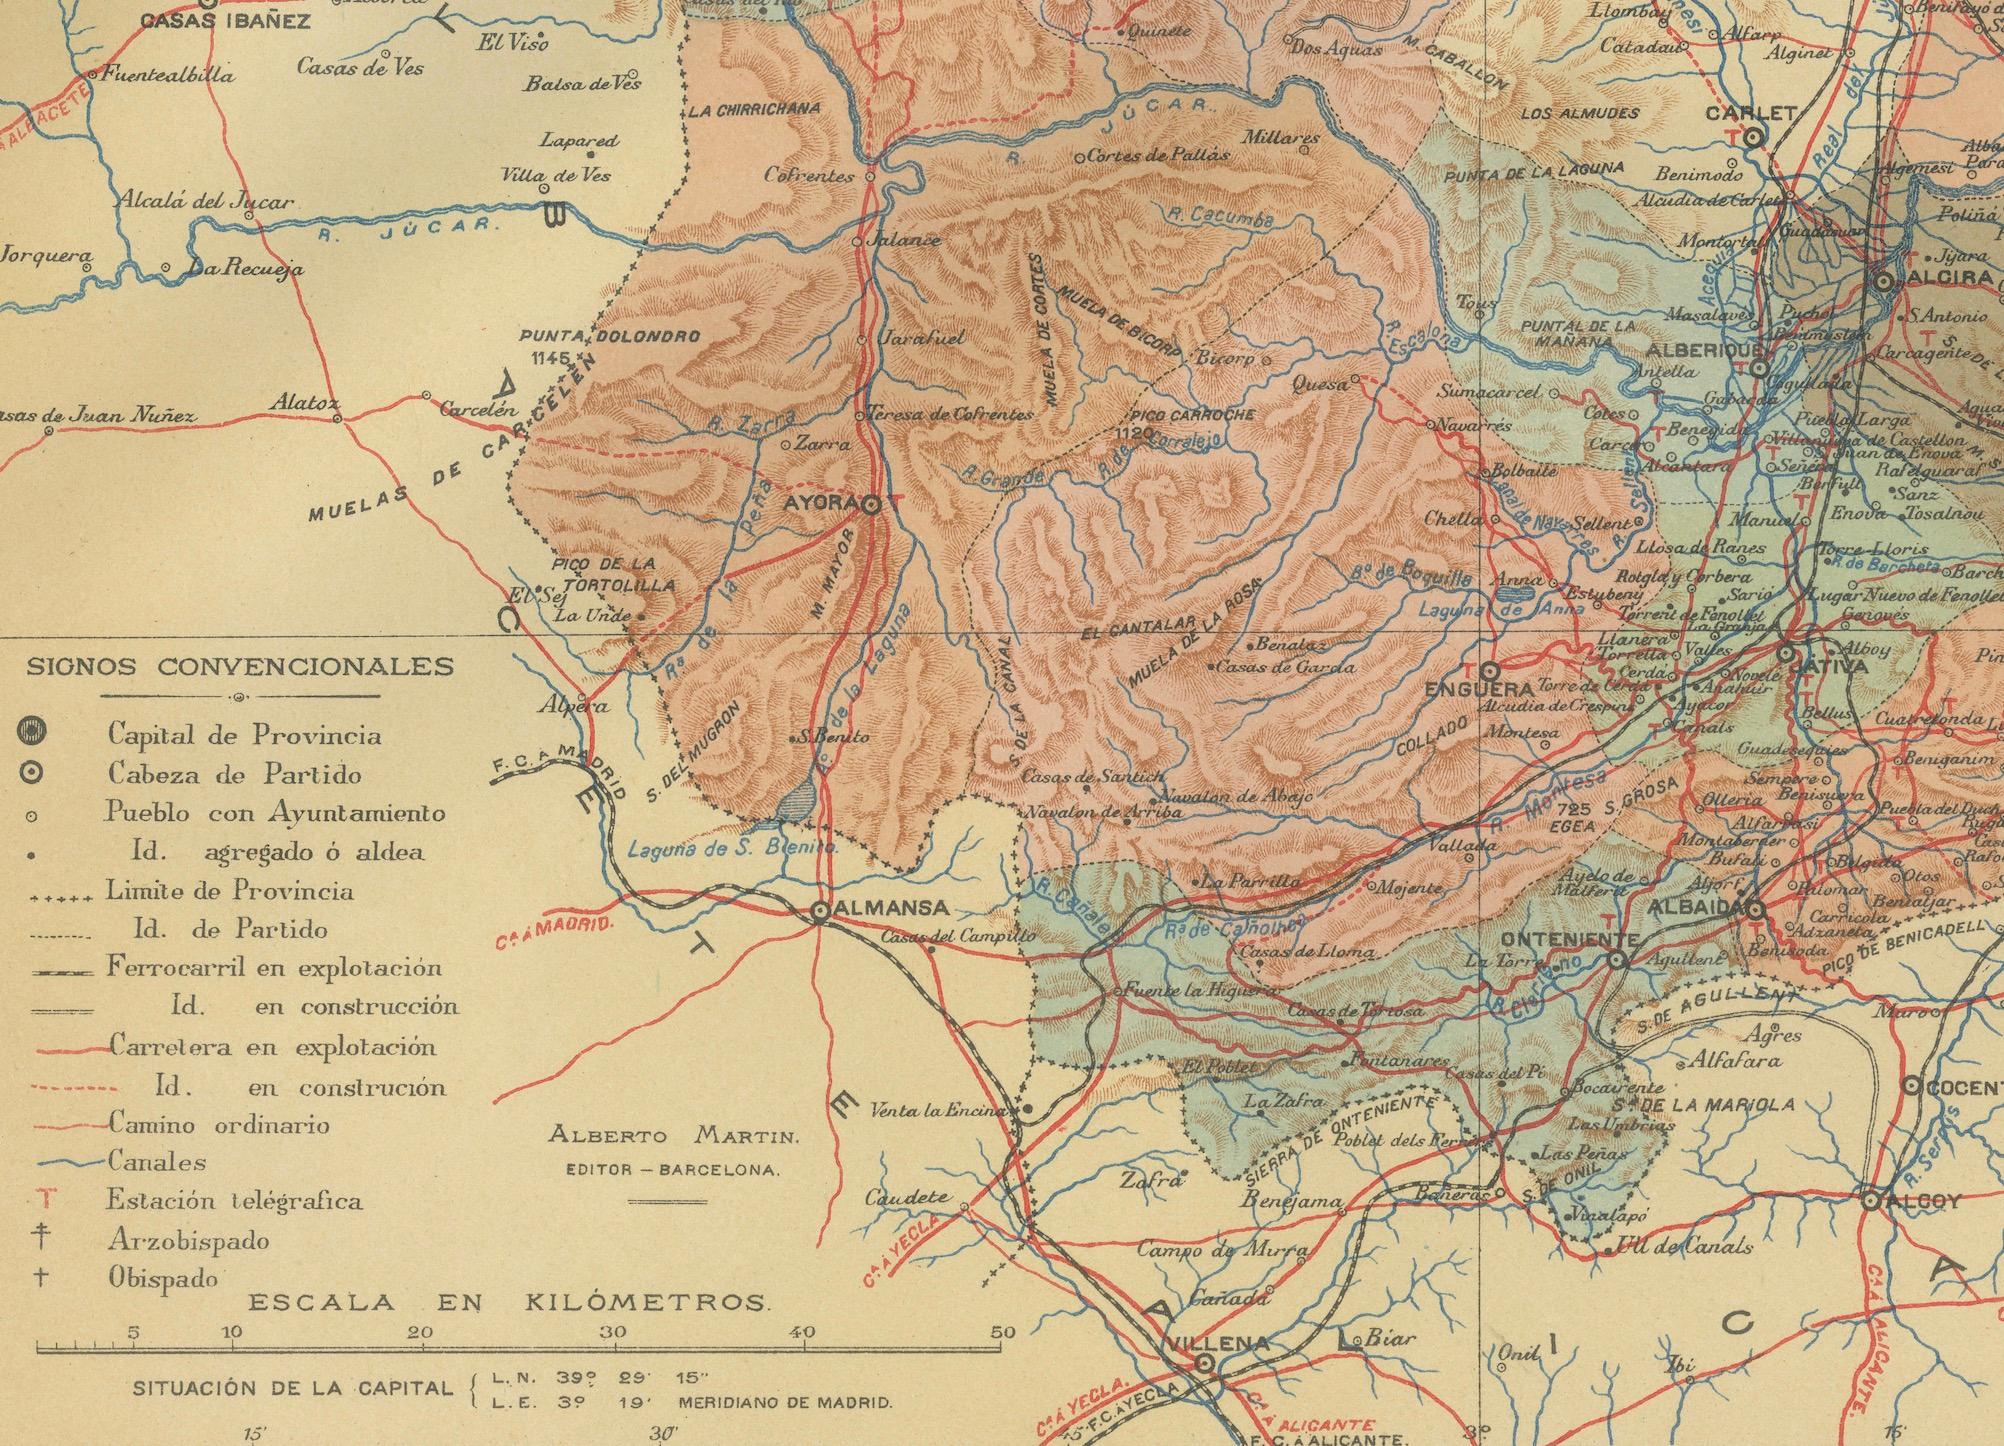 A historical map of the province of Valencia, dated 1901. The map includes intricate details such as topographical features, with mountain ranges and river systems prominently marked. The province's boundaries are clearly outlined, and various types